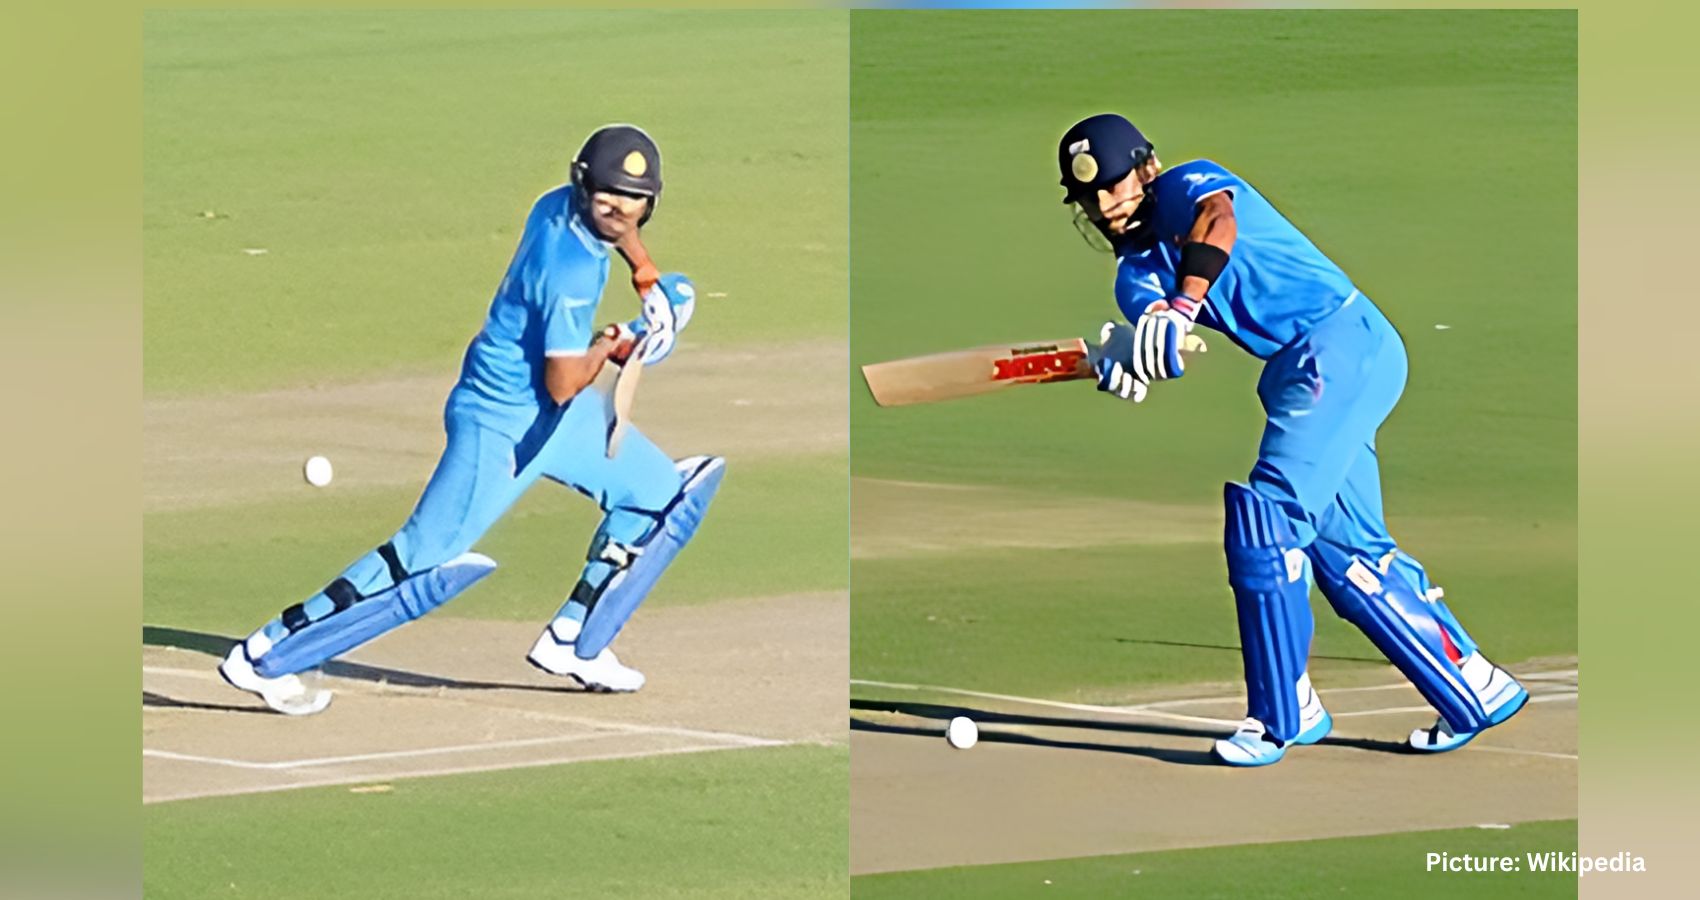 India’s T20 World Cup: A Journey of Transition and Redemption for Kohli and Sharma